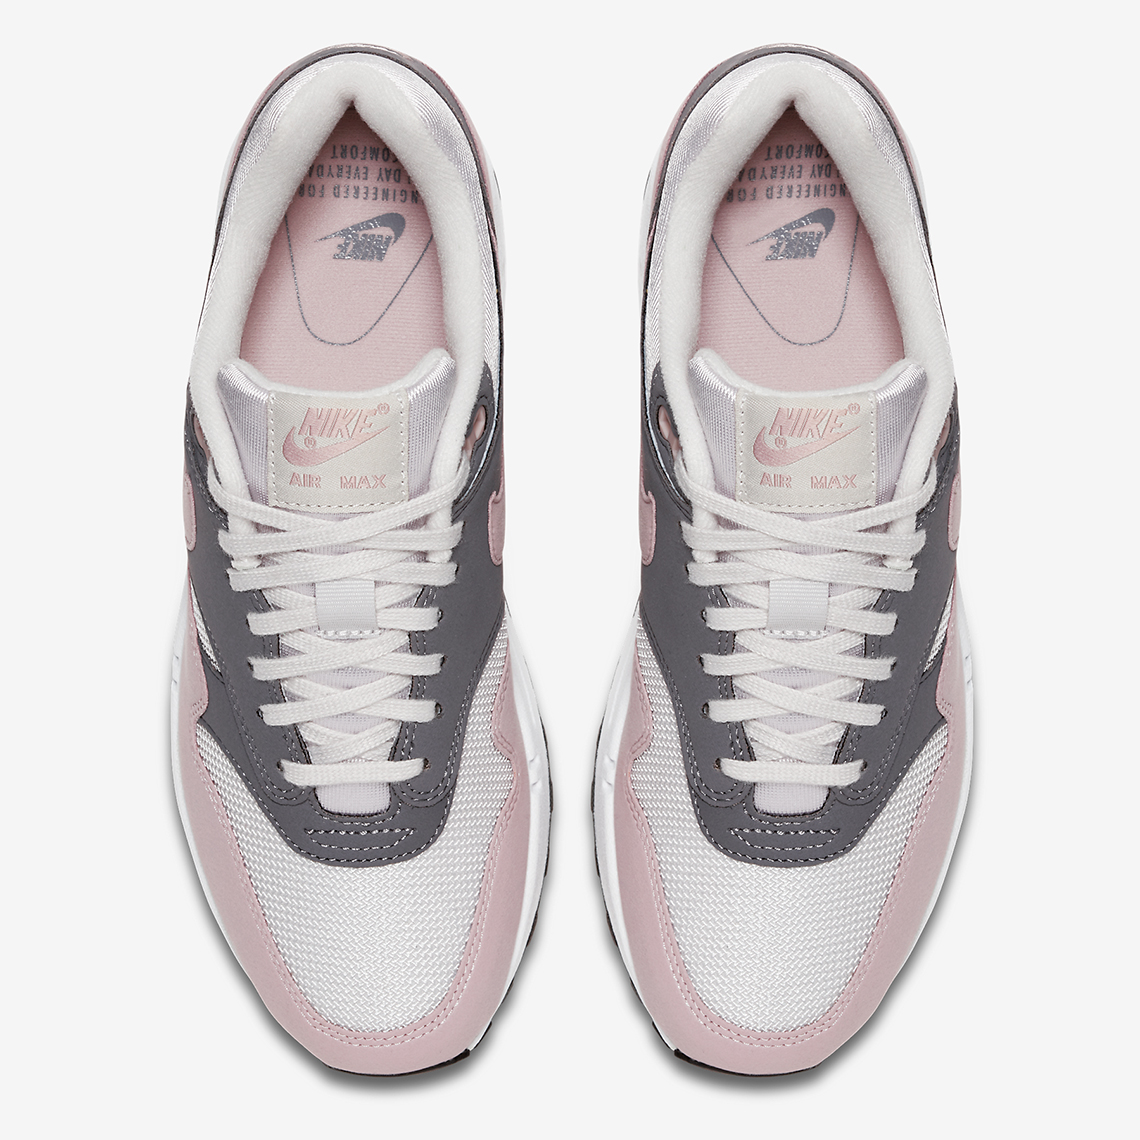 Nike Air Max 1 Soft Pink319986 032 Release Info 6